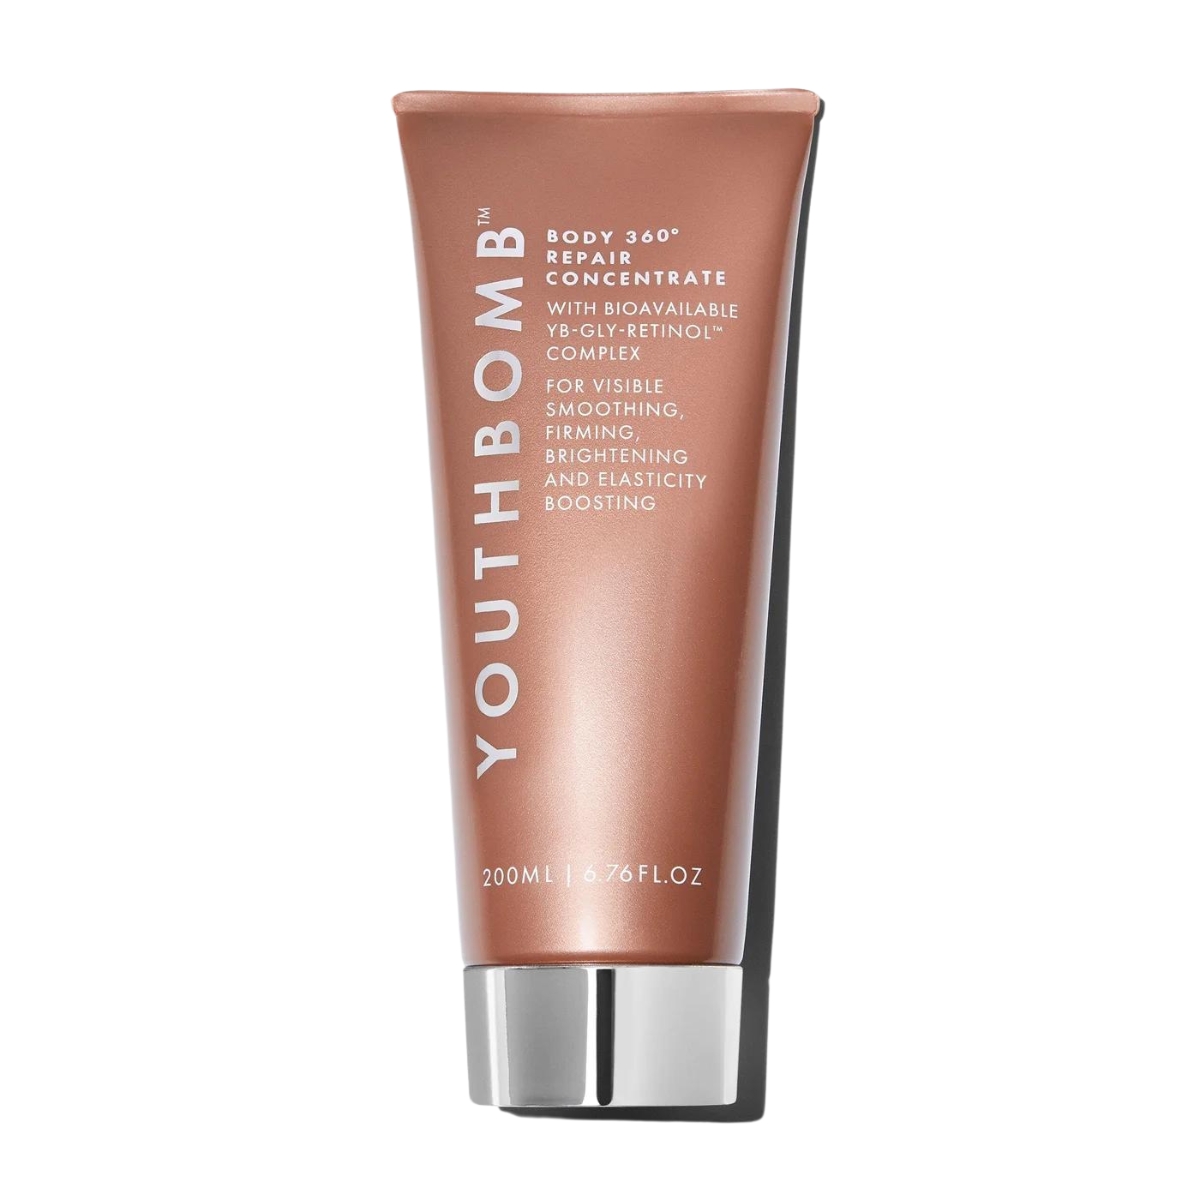 Beauty Pie Youthbomb Body 360° Repair Concentrate